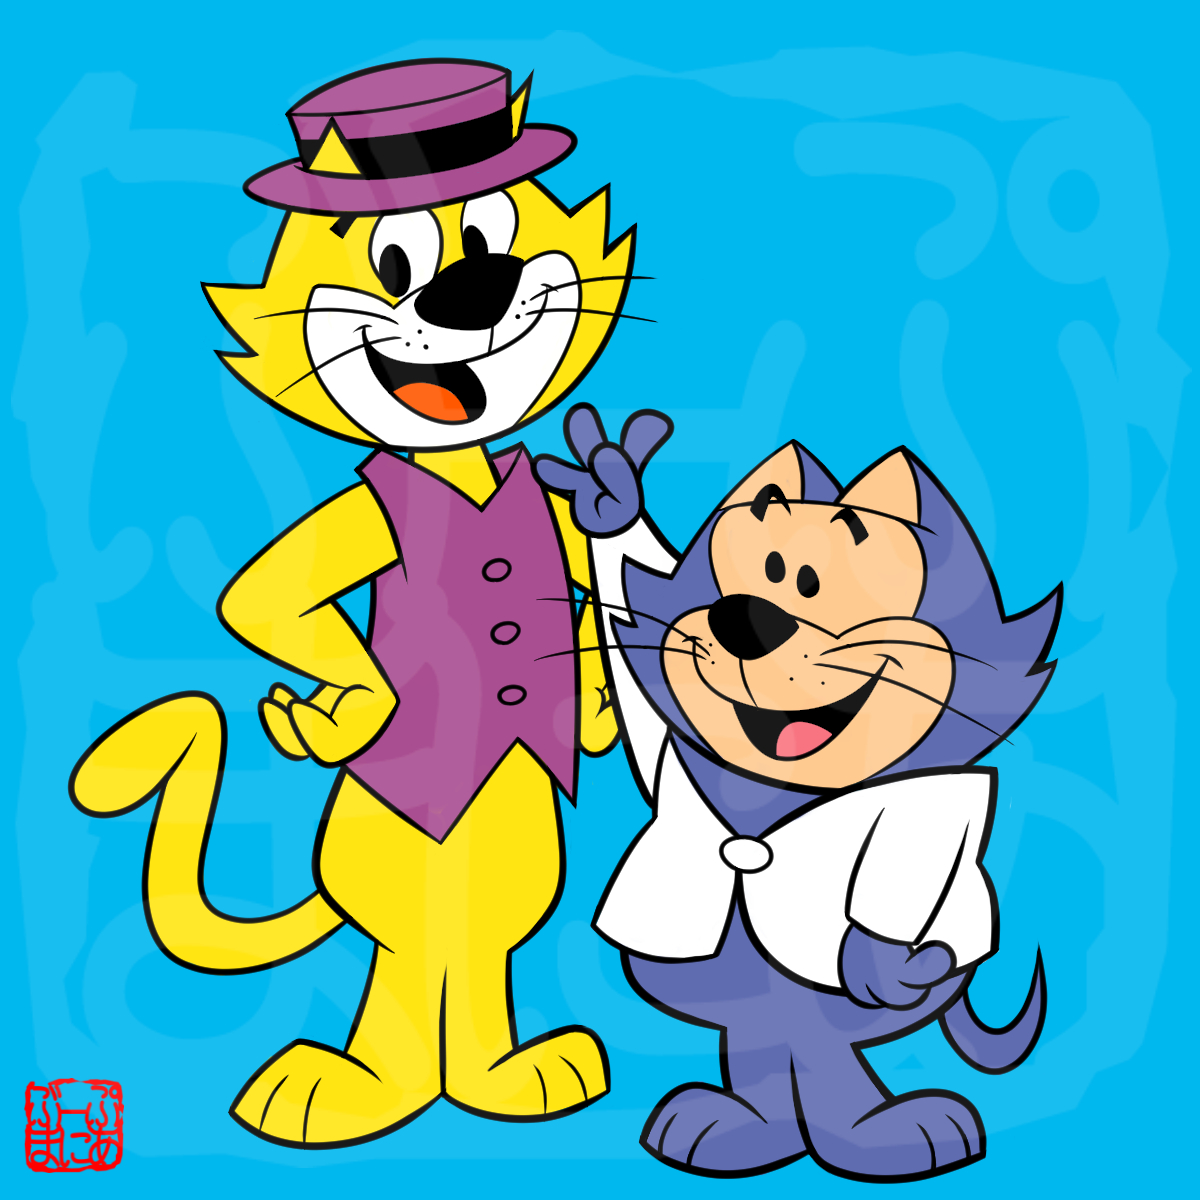 Top Cat by boopmania on DeviantArt